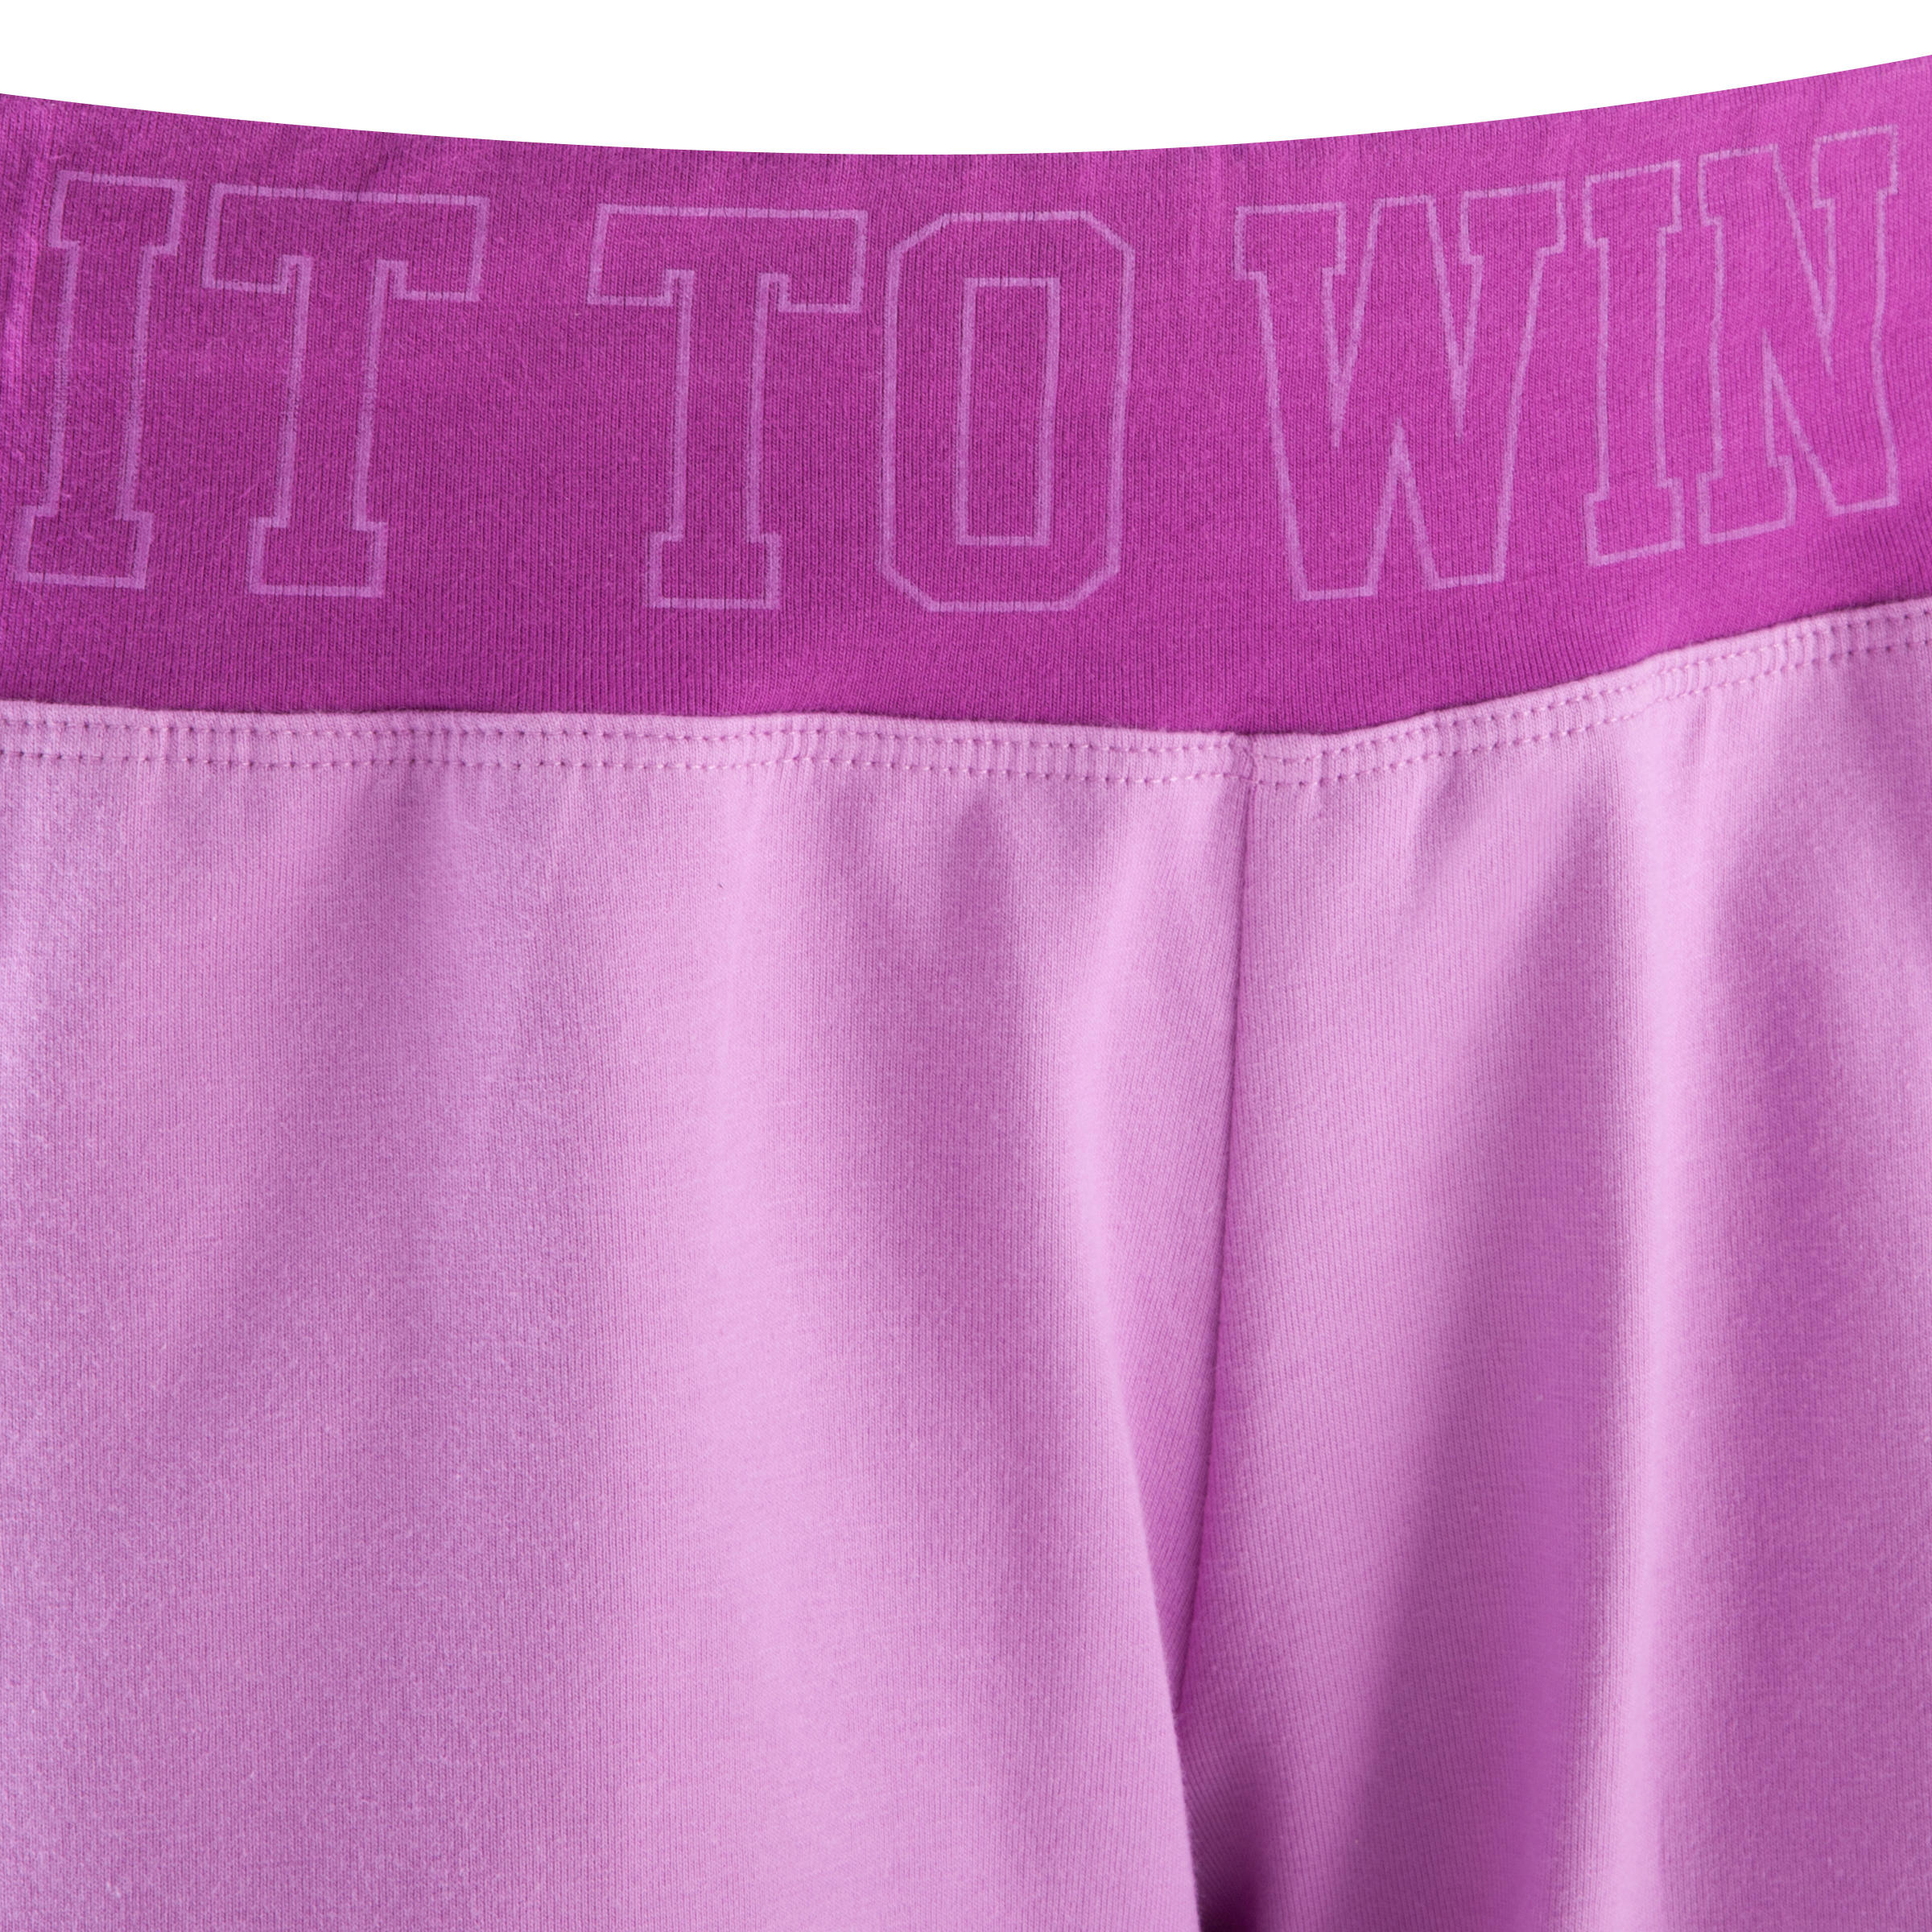 Women's Fitness Shorts with Contrasting Print Waistband - Mauve/Dark Pink 7/11